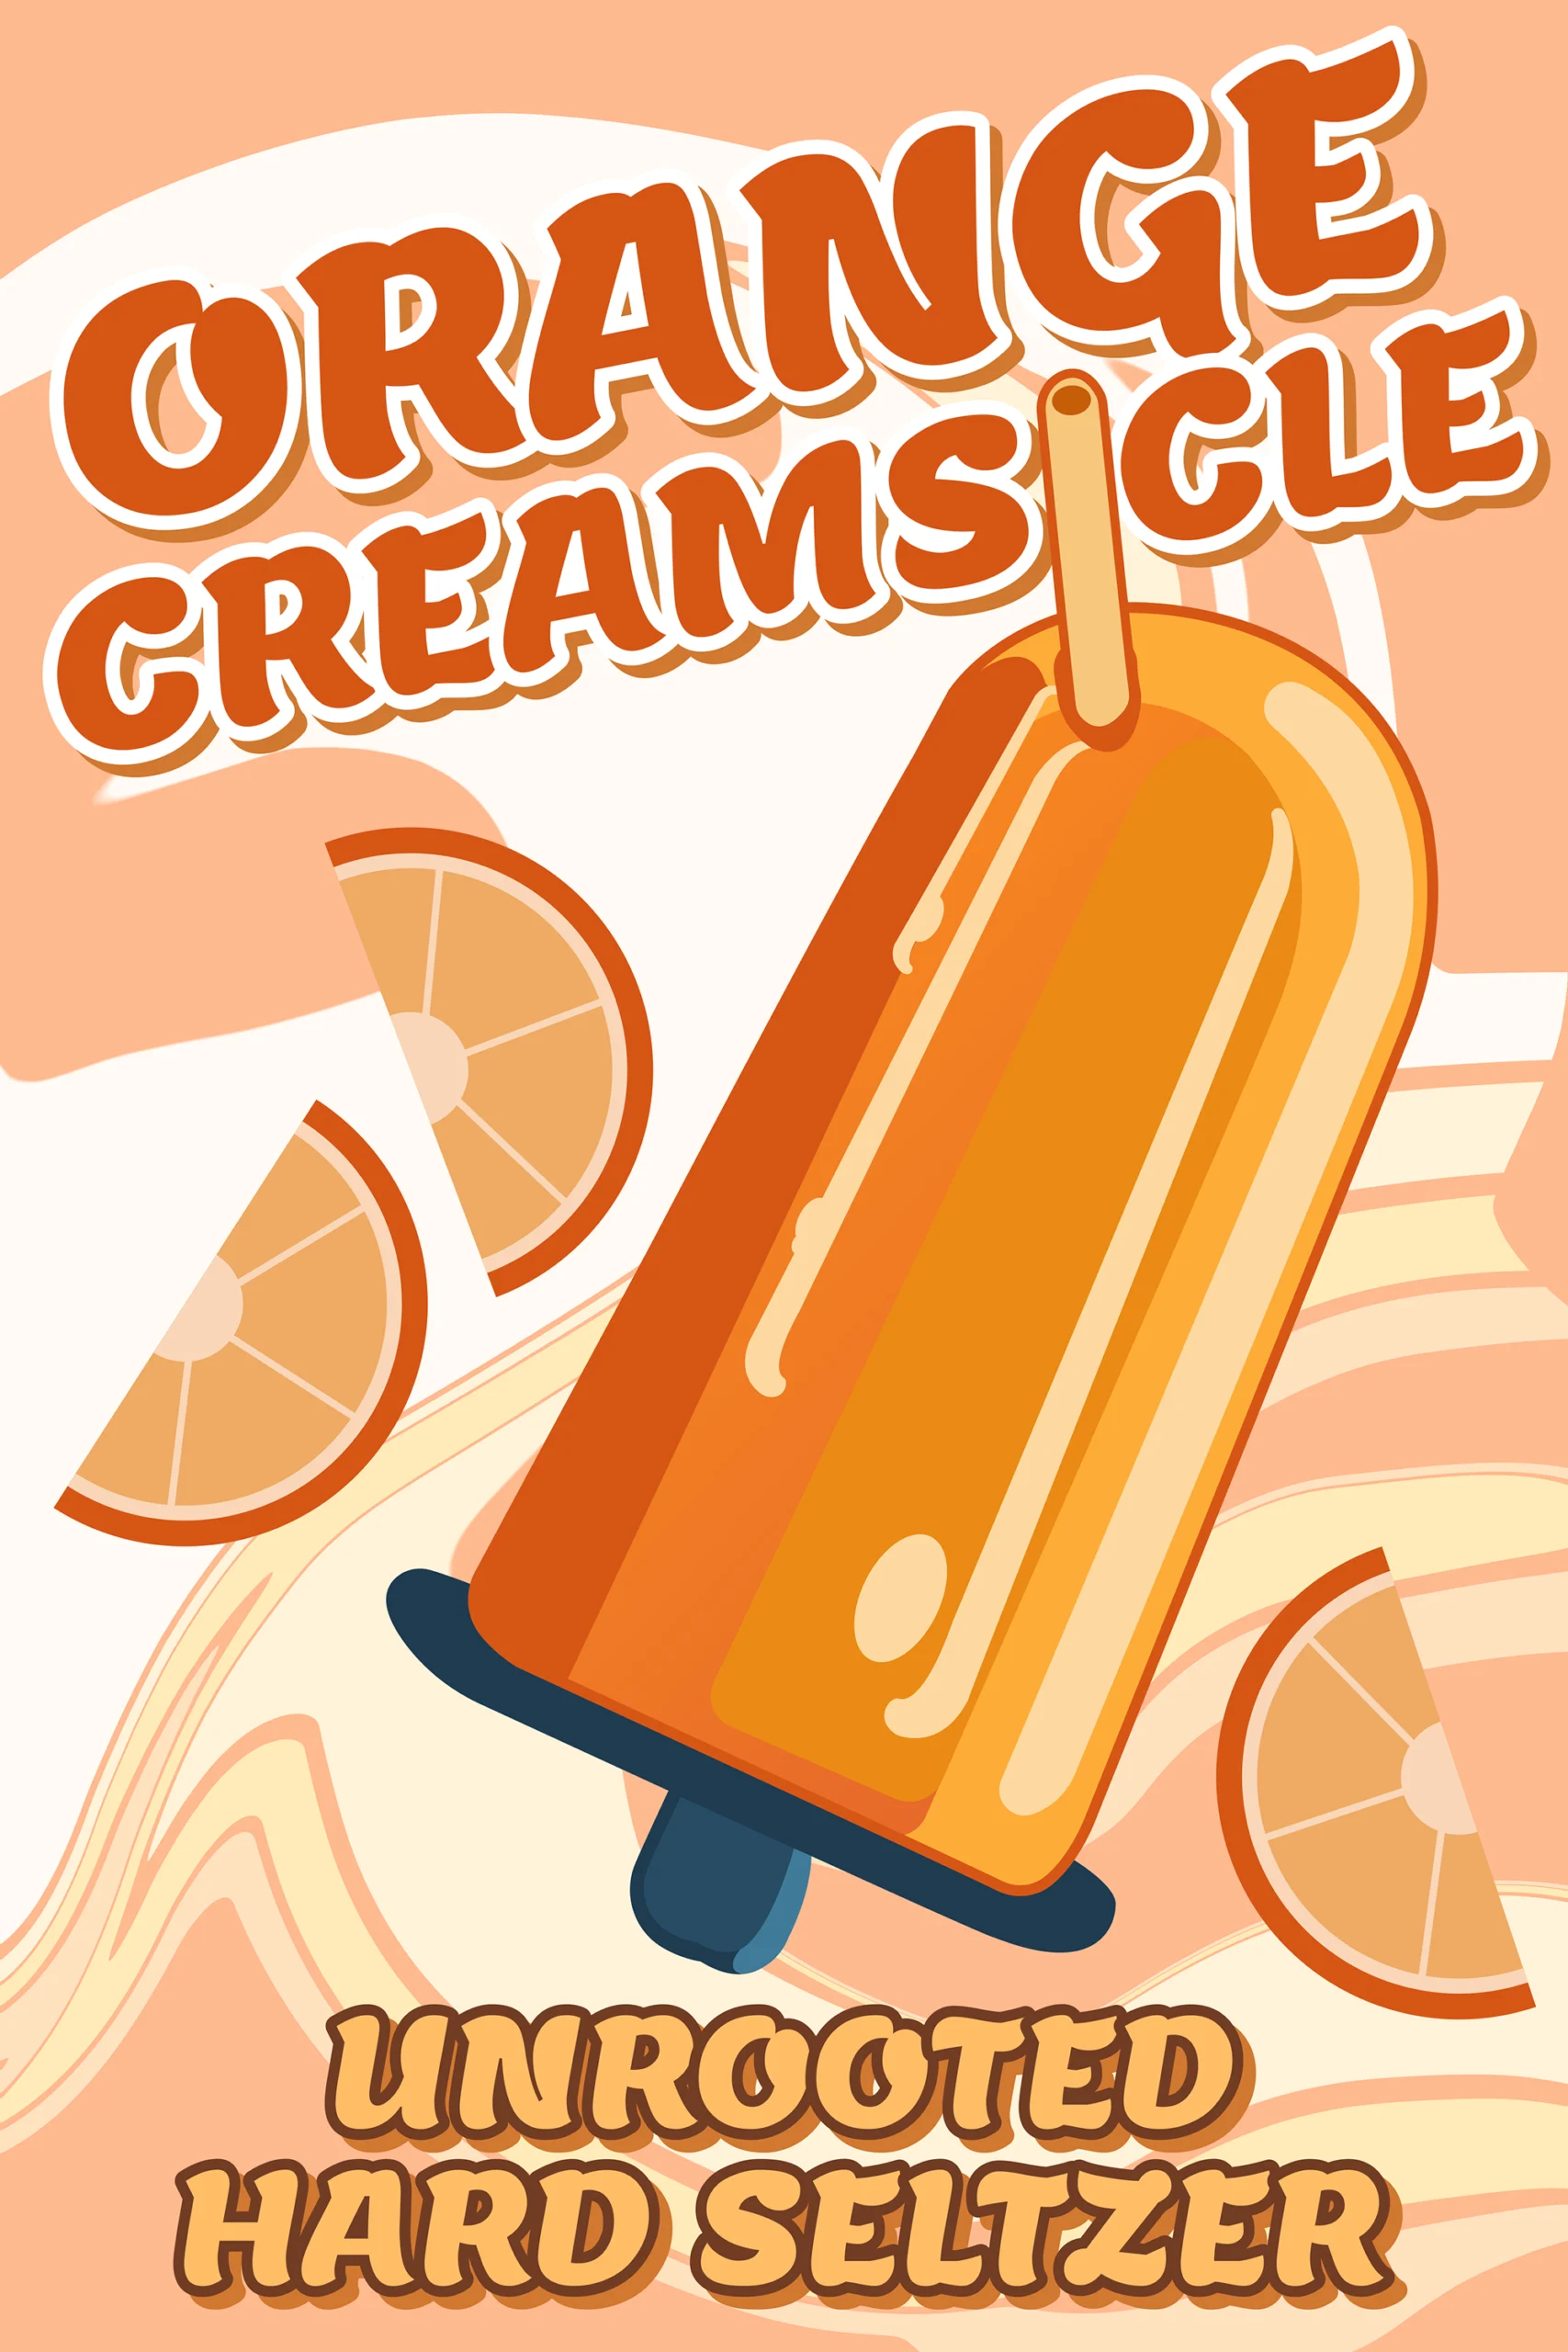 Poster representing the beverage ORANGE CREAMSICLE, a HARD SELTZER with an alcohol content of 5%, available on tap at Transplants Brewing